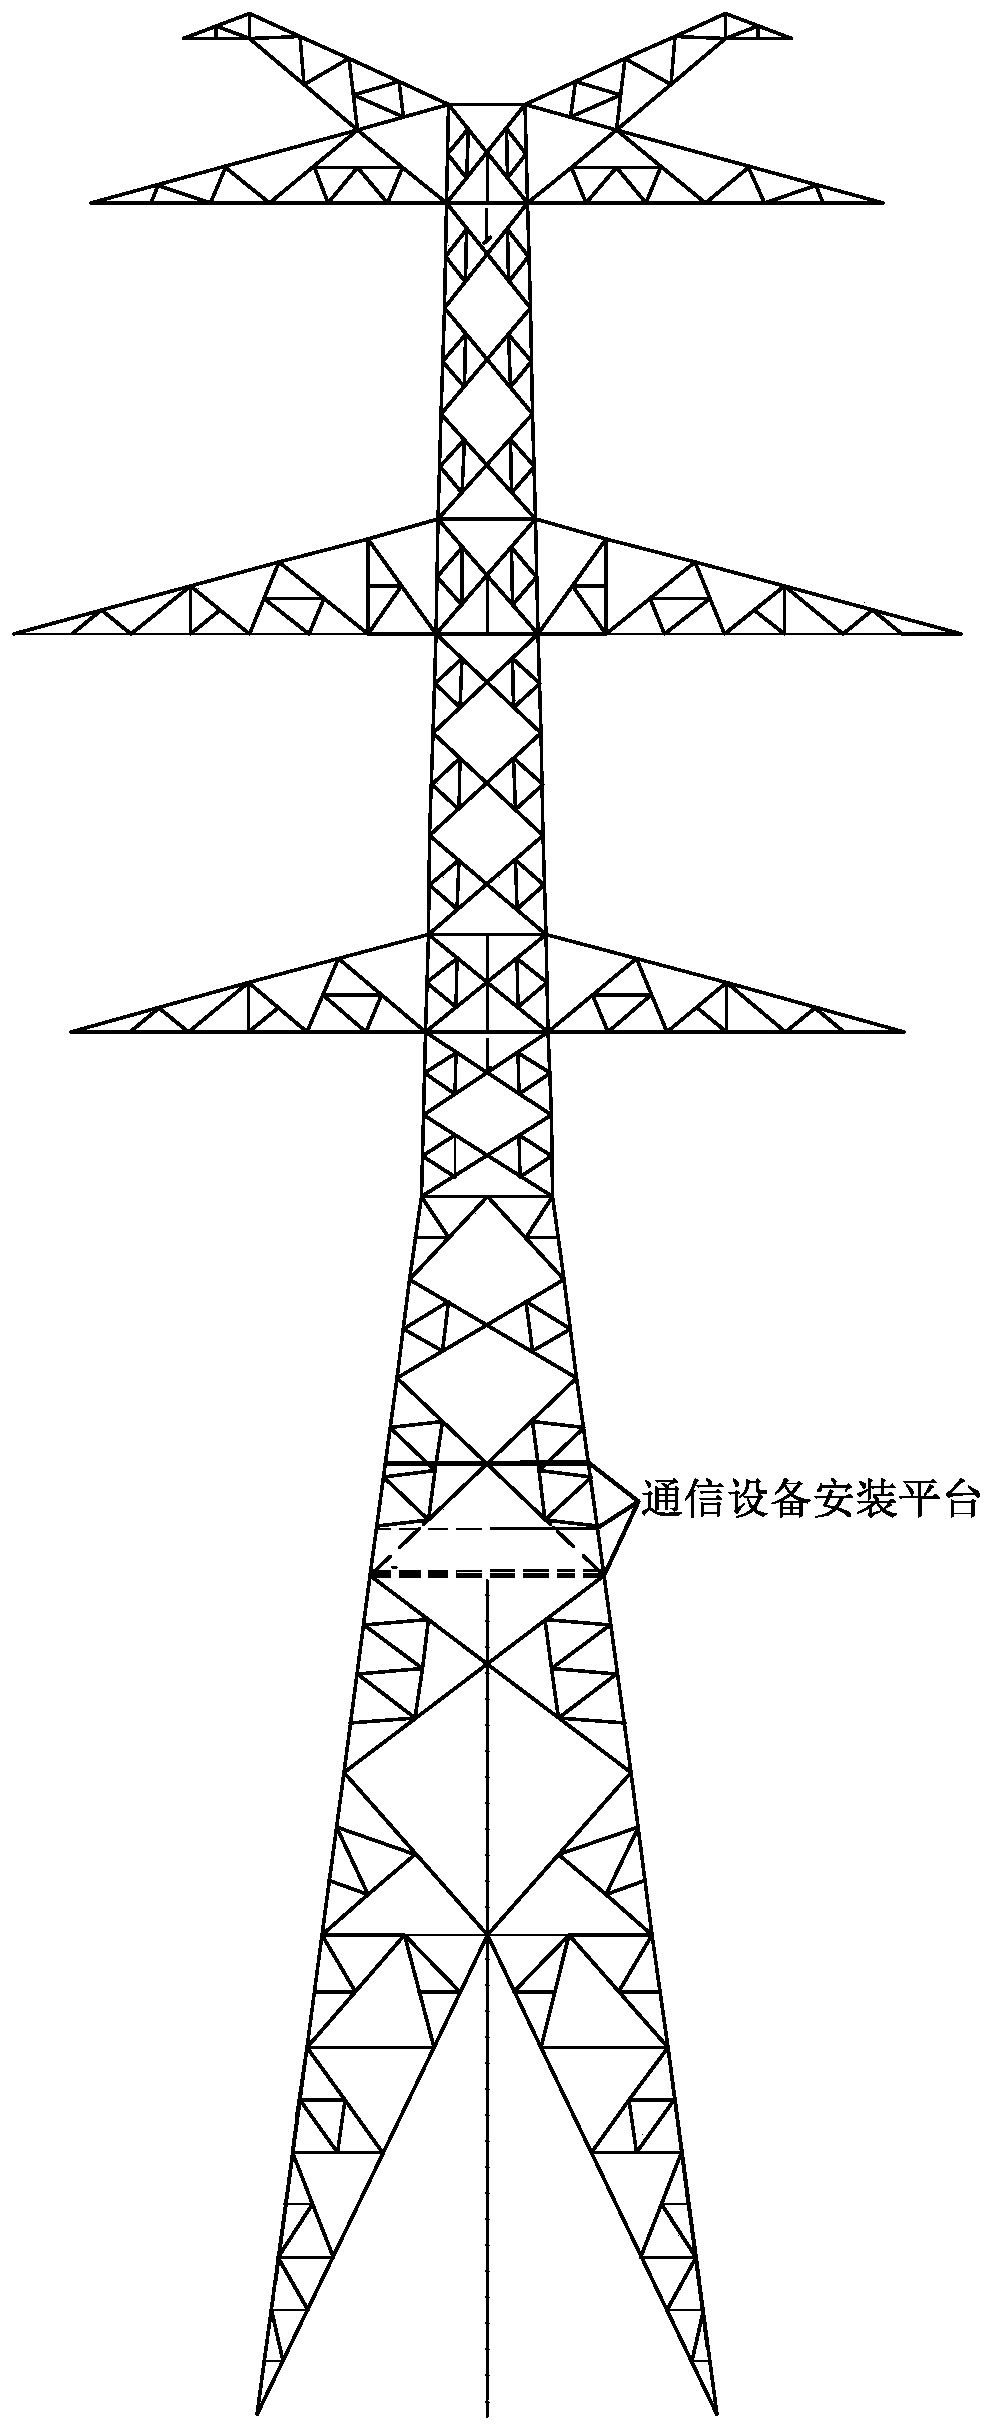 Design method for selecting installation position of shared iron tower communication equipment